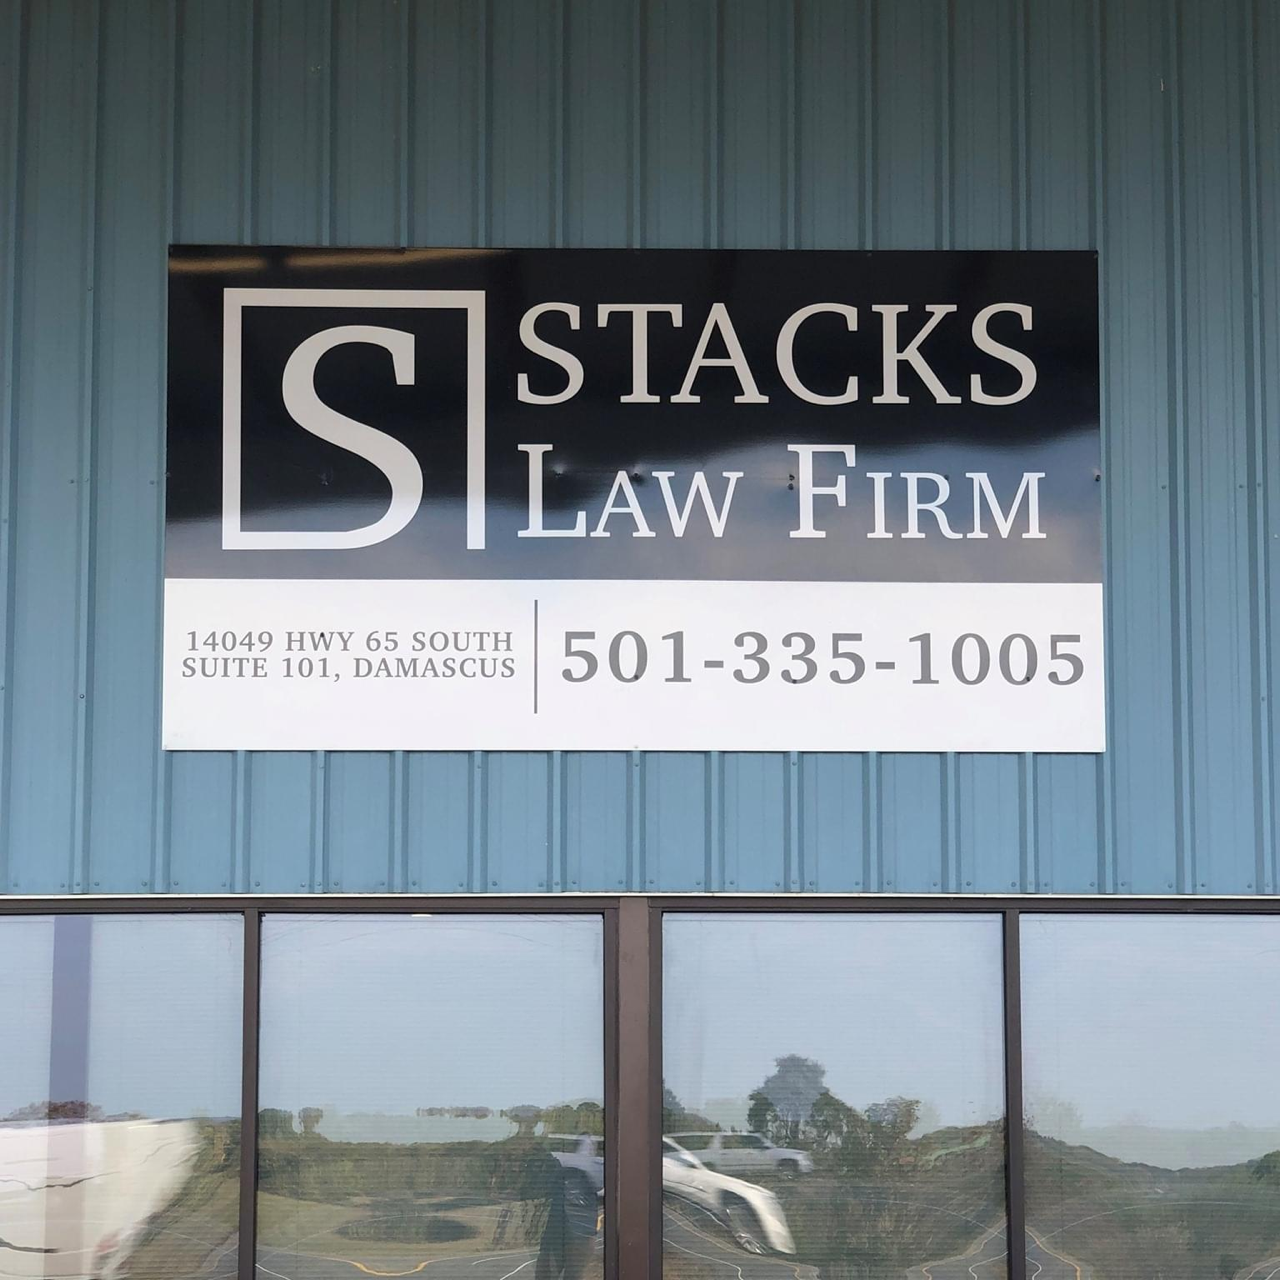 Stacks Law Firm 14049 Hwy 65 S Suite 101, Damascus Arkansas 72039